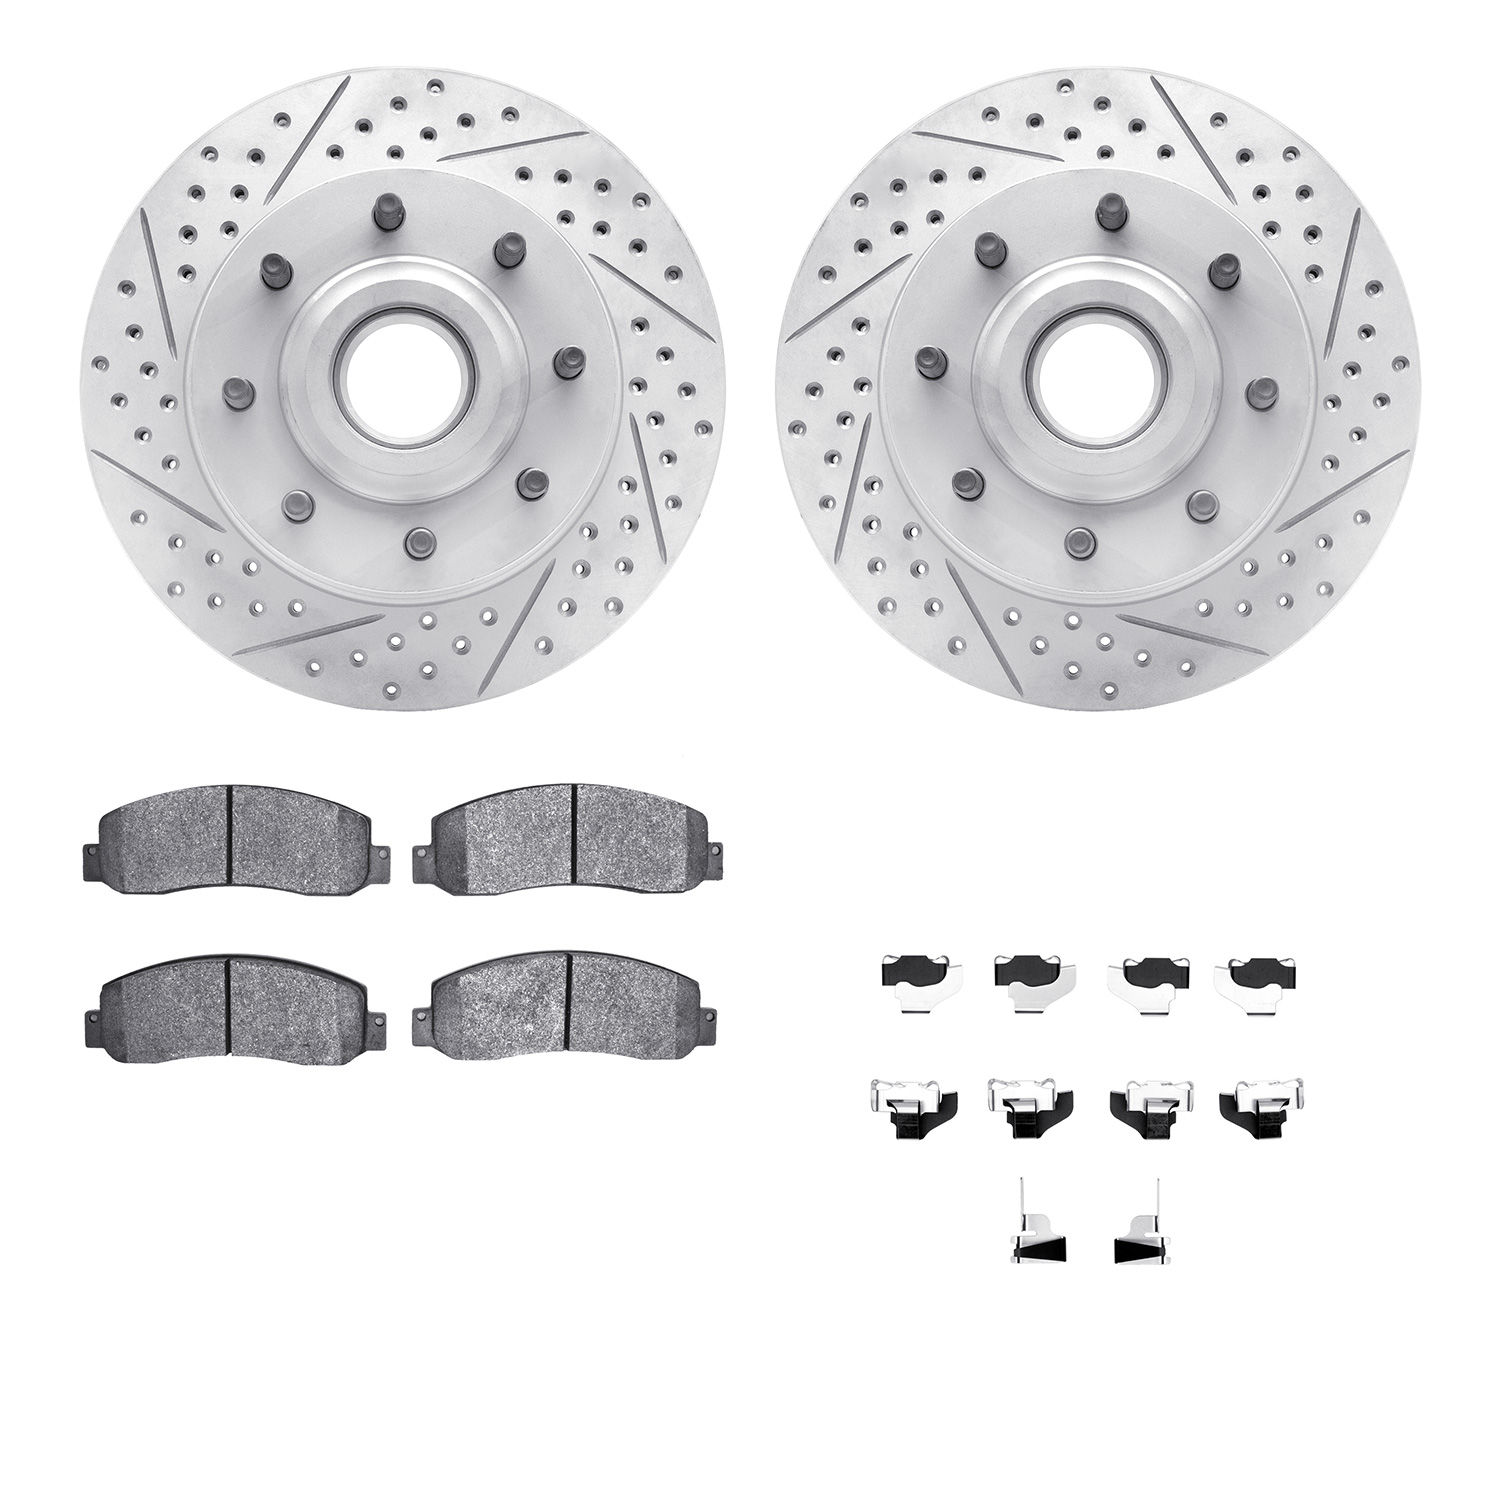 2212-99168 Geoperformance Drilled/Slotted Rotors w/Heavy-Duty Pads Kit & Hardware, 2006-2012 Ford/Lincoln/Mercury/Mazda, Positio